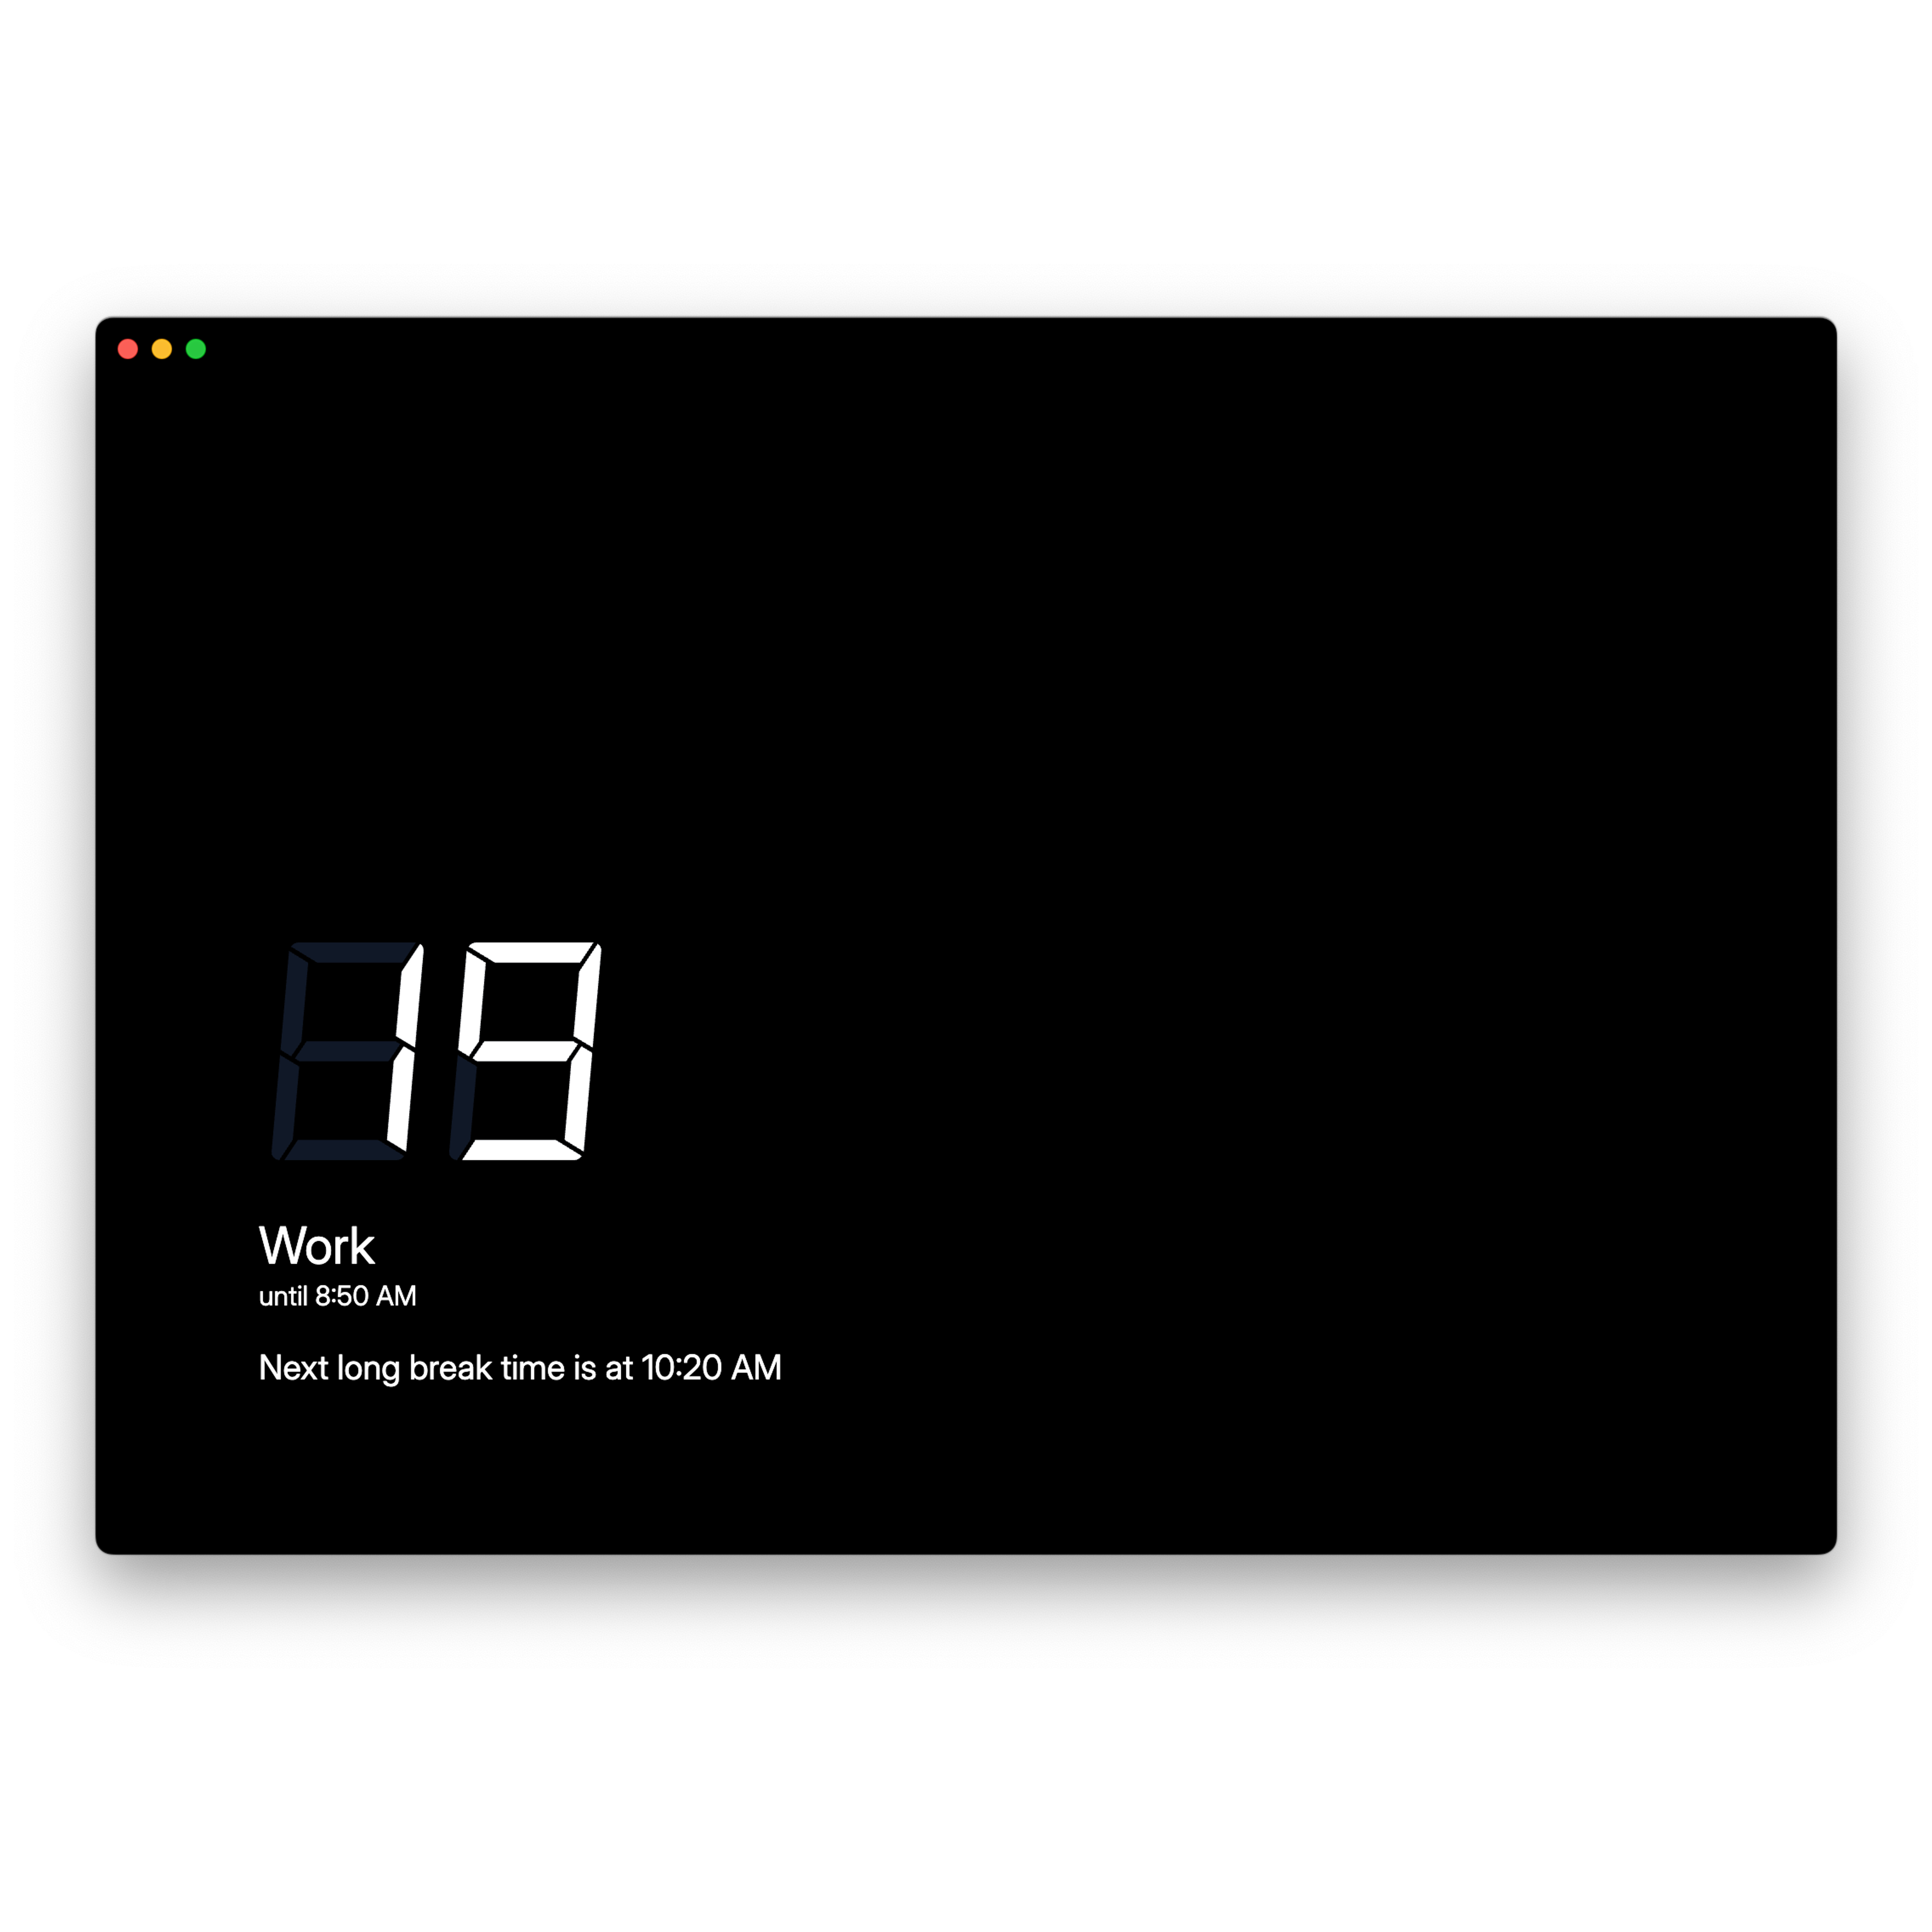 Screenshot of a Pomodoro timer application interface with a minimalist design on a dark background. In the bottom left, large digital clock numbers display "19". Below the number, the text reads "Work until 8:50 AM". Below that text, another text reads "Next long break time is at 10:20 AM".